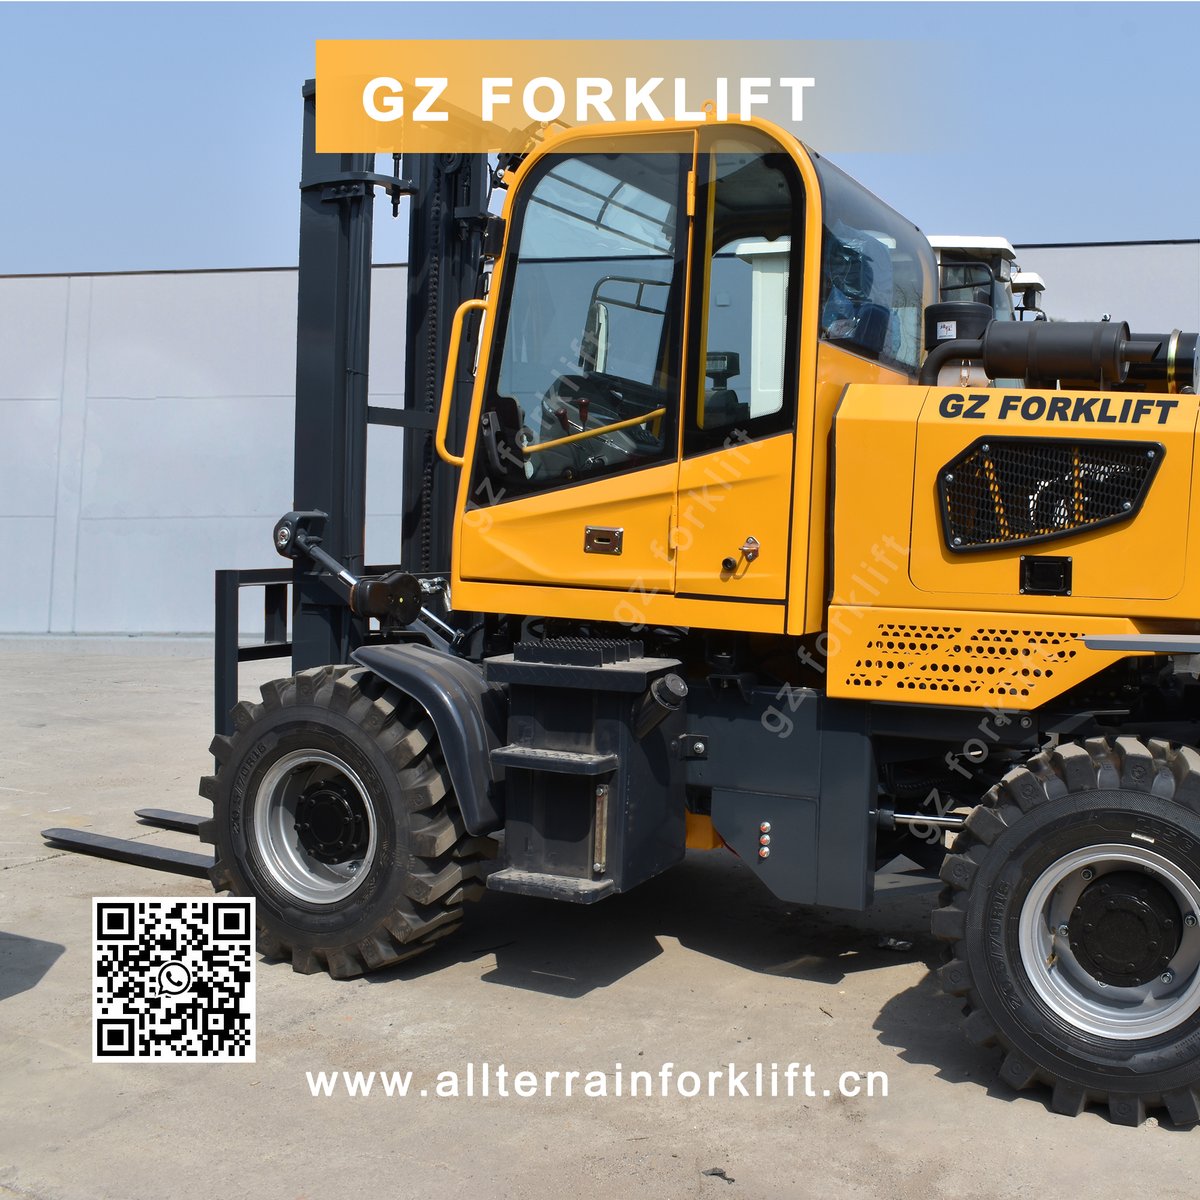 GZ forklift is a professional manufacturer of rough terrain forklift, we can offer you 1.5~10 ton forklift and provide you one-stop service. 📱 Contact us at whatsapp 86 13053557263 for more details. 🌐 allterrainforklift.cn #ForkliftManufacturer #ForkliftTruck